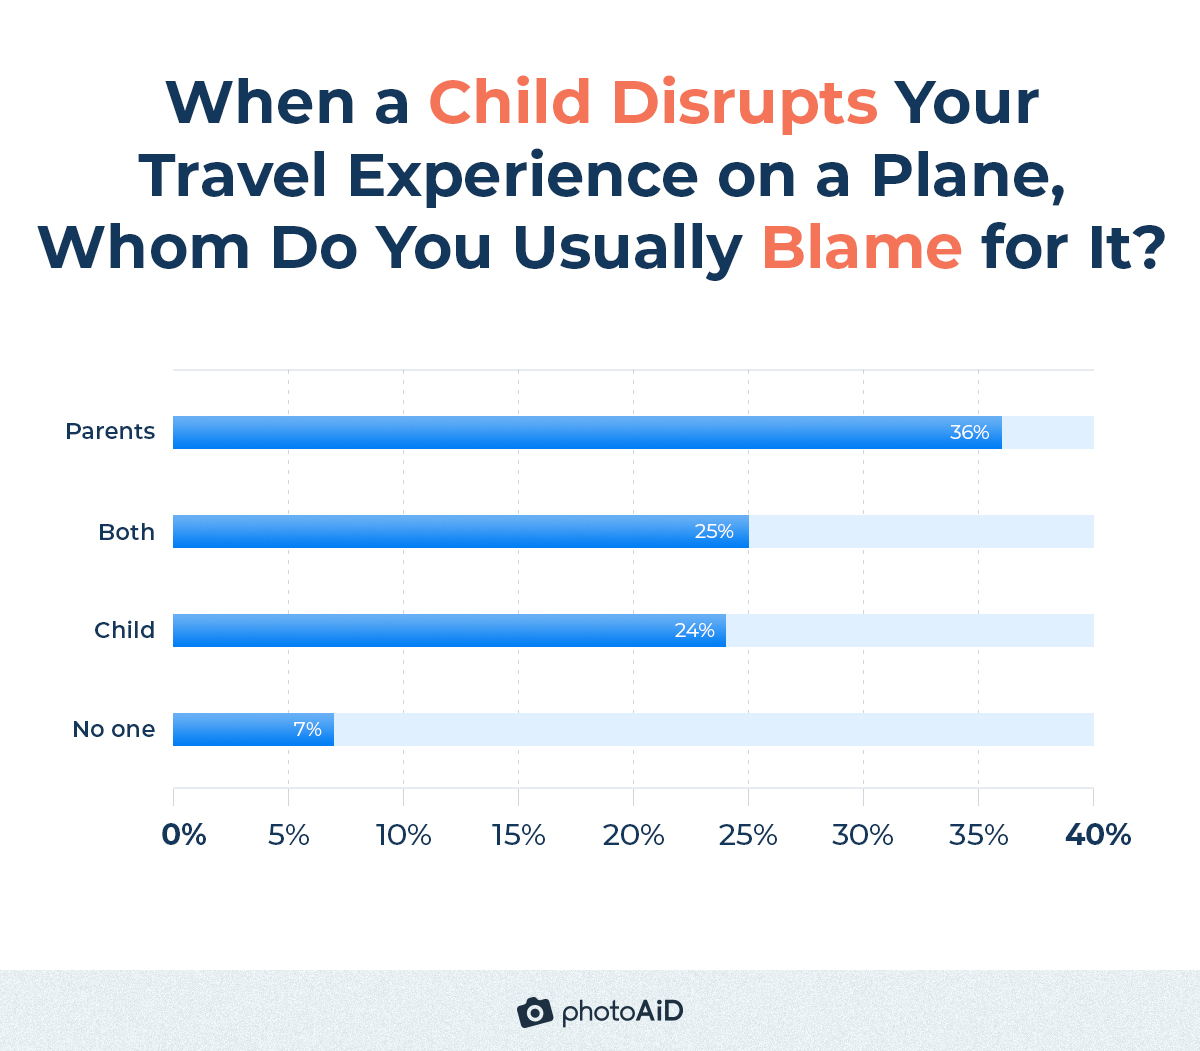 passengers usually blame parents (36%) for not being able to handle their children